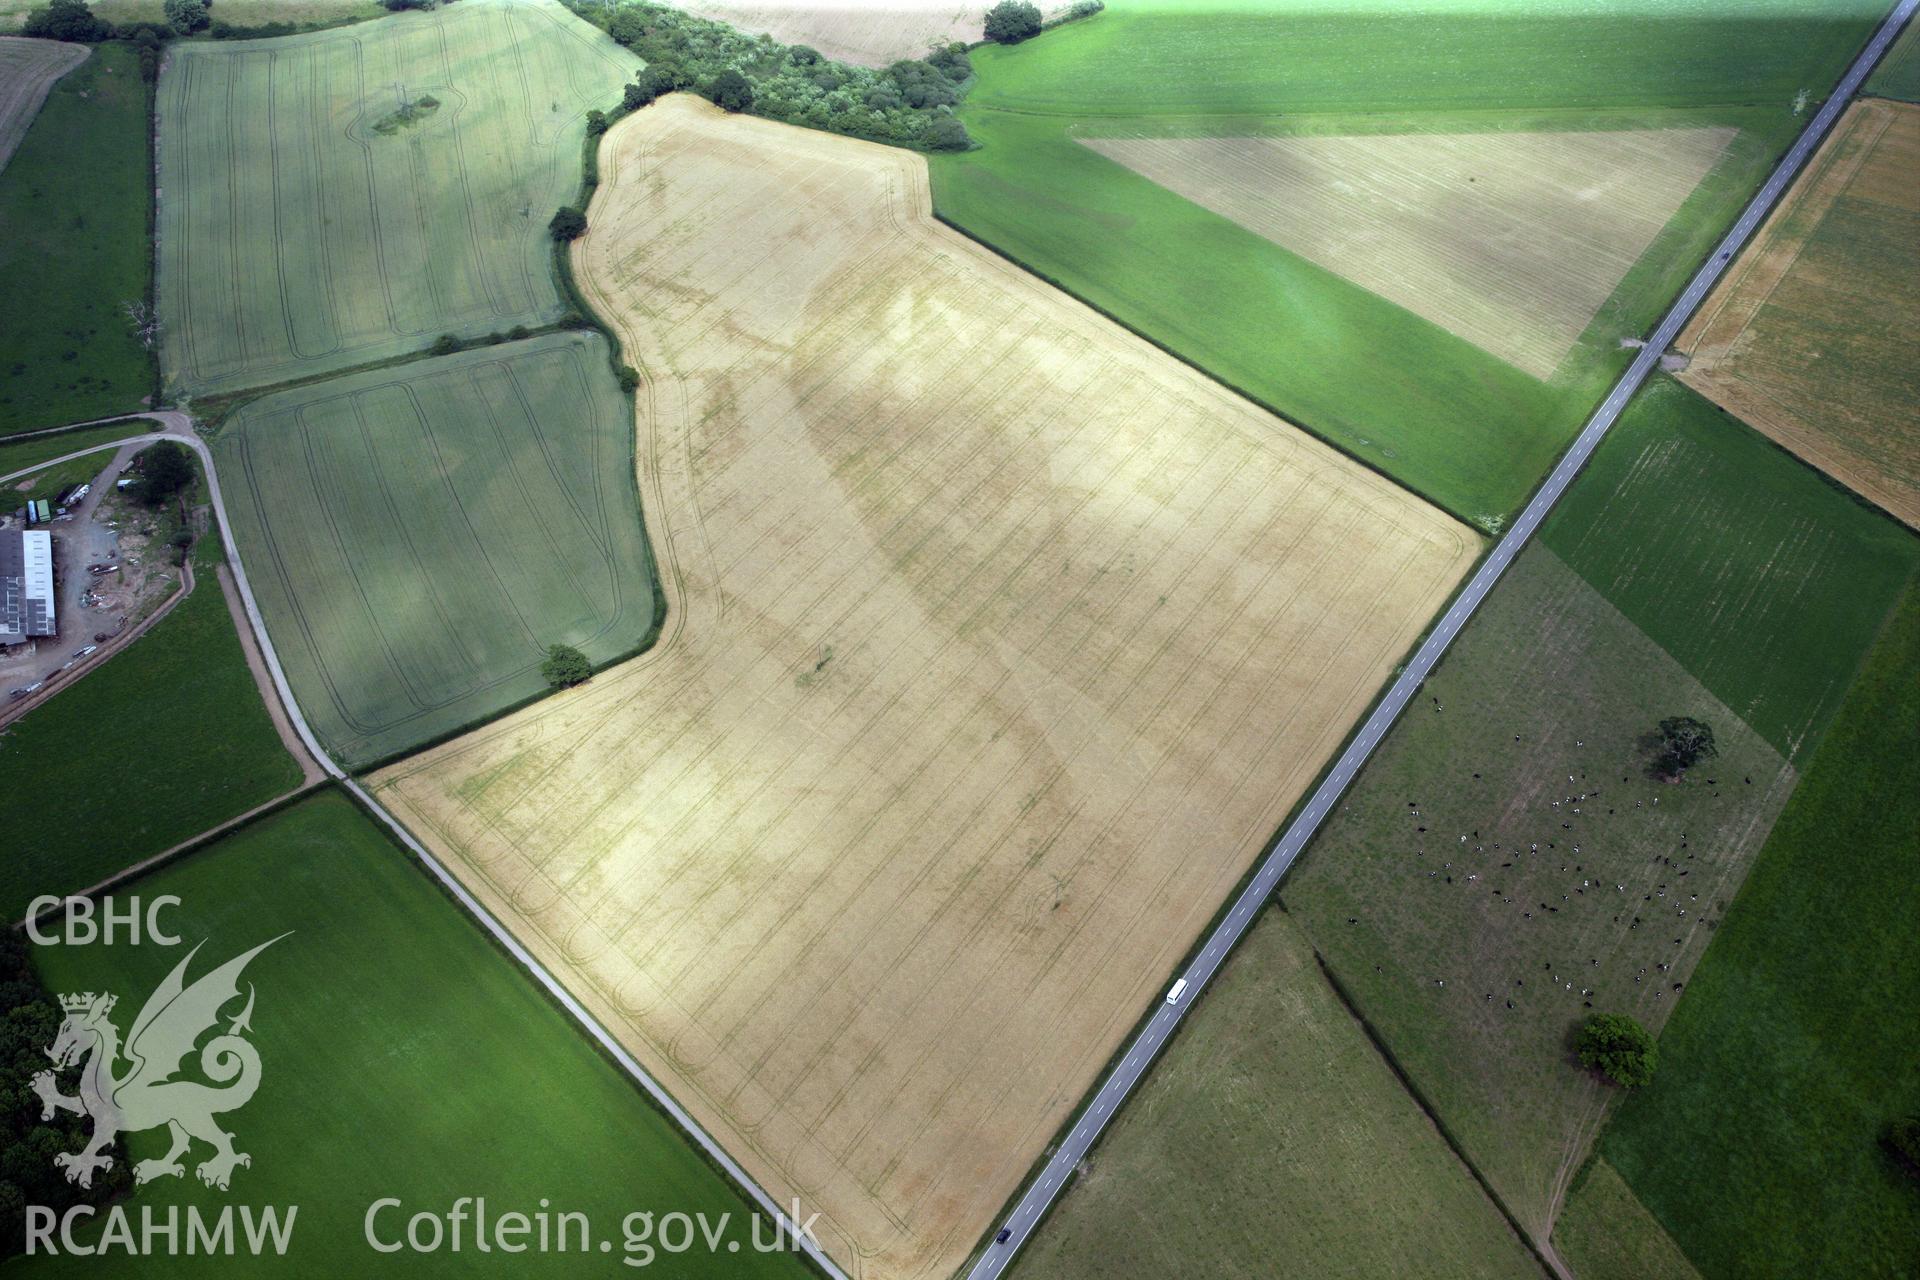 RCAHMW colour oblique photograph of Gerwyn-Fechan round barrow and other cropmarks. Taken by Toby Driver and Oliver Davies on 05/07/2011.